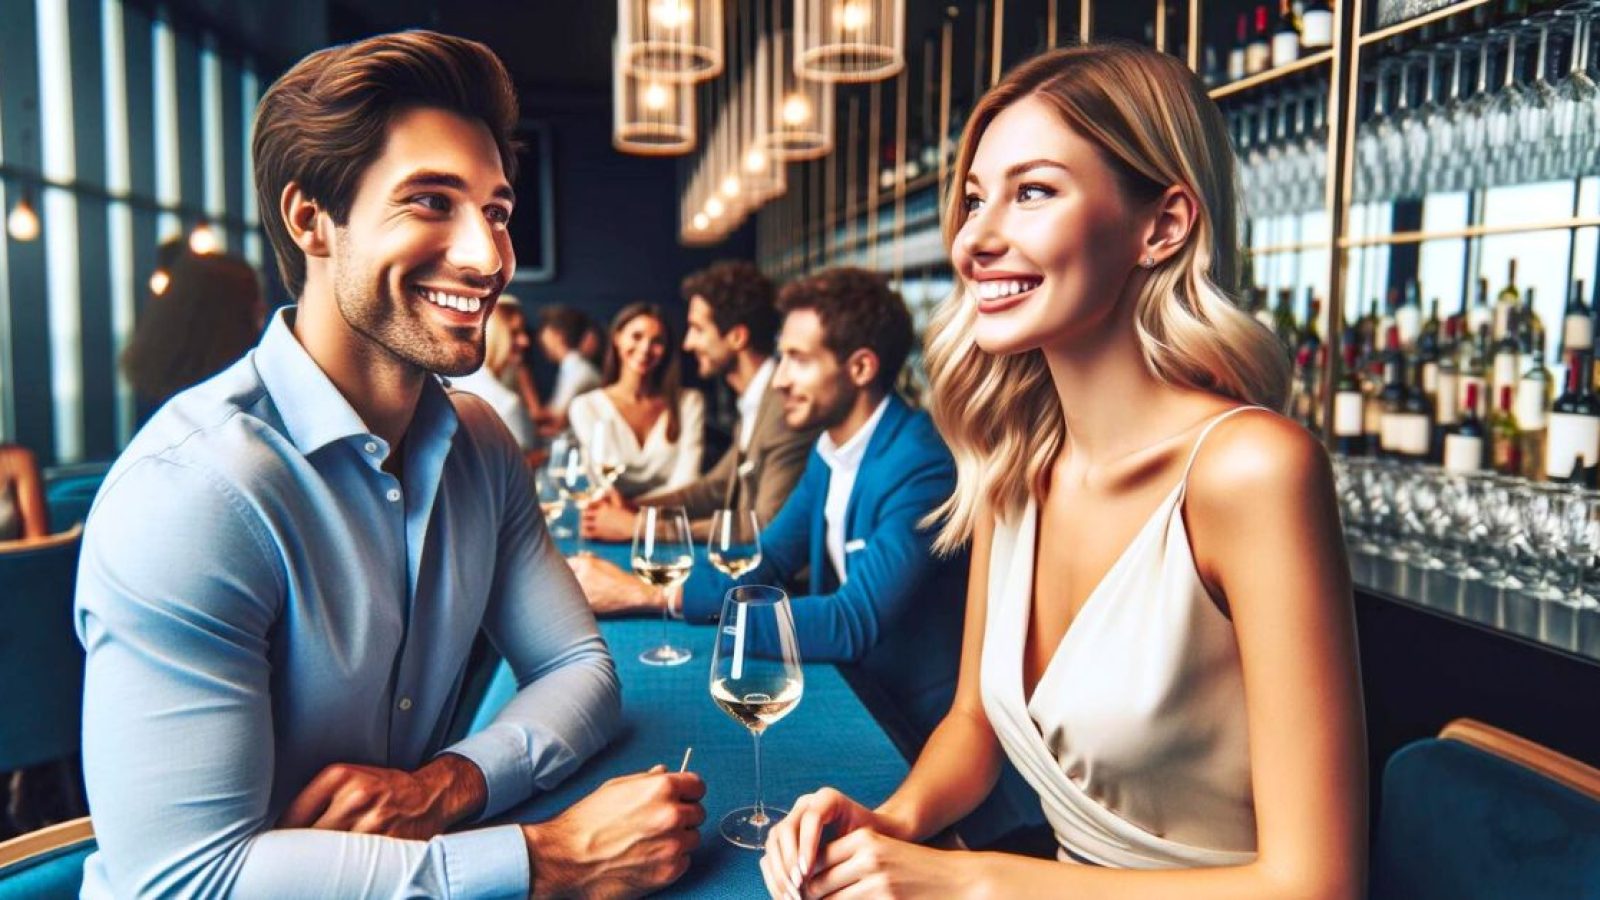 single man and woman on a speed date at a bar with other couples in background